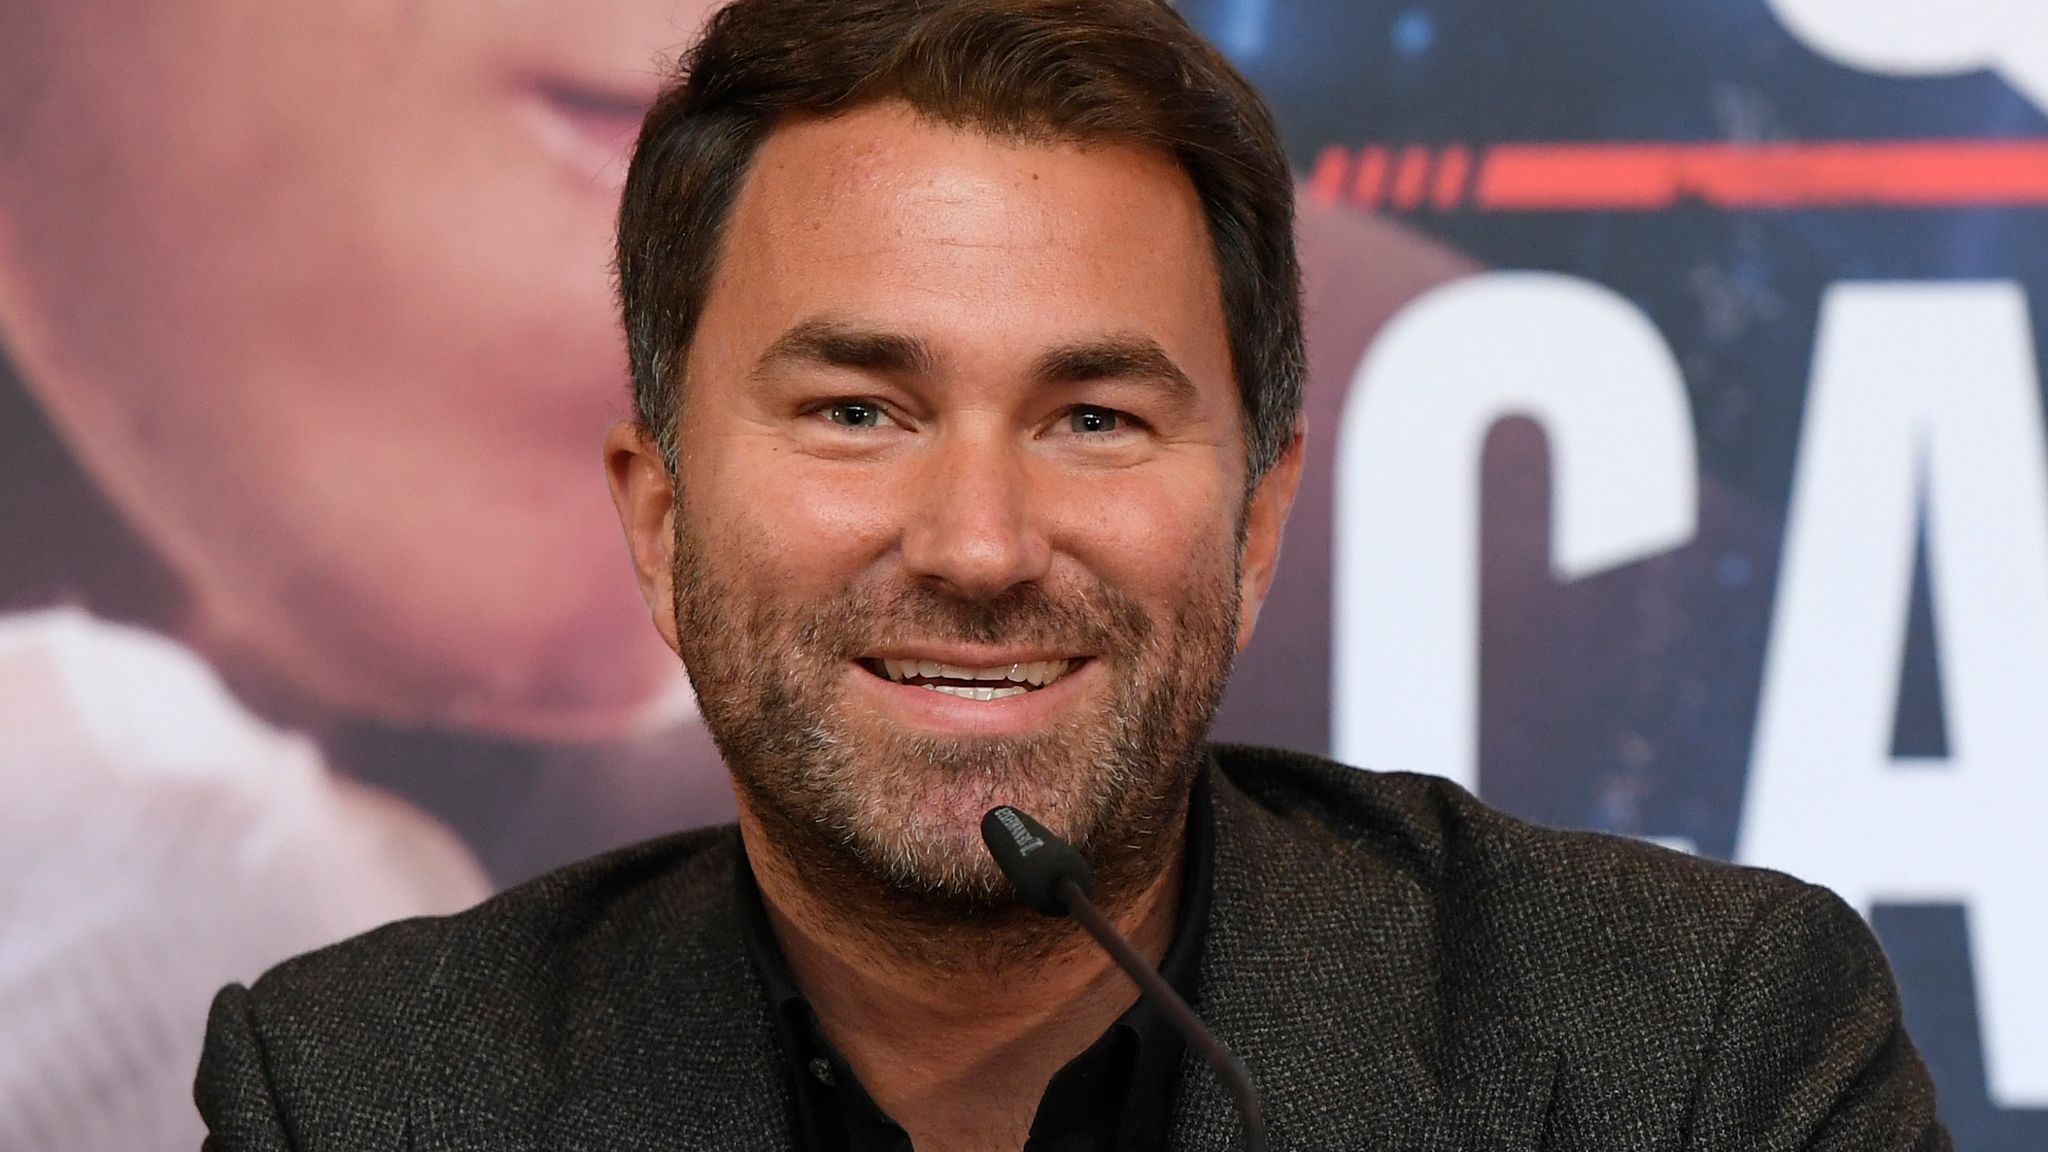 Eddie Hearn explains how Ryan Garcia's new attitude could benefit him against Devin Haney, likening it to a crucial putt in golf